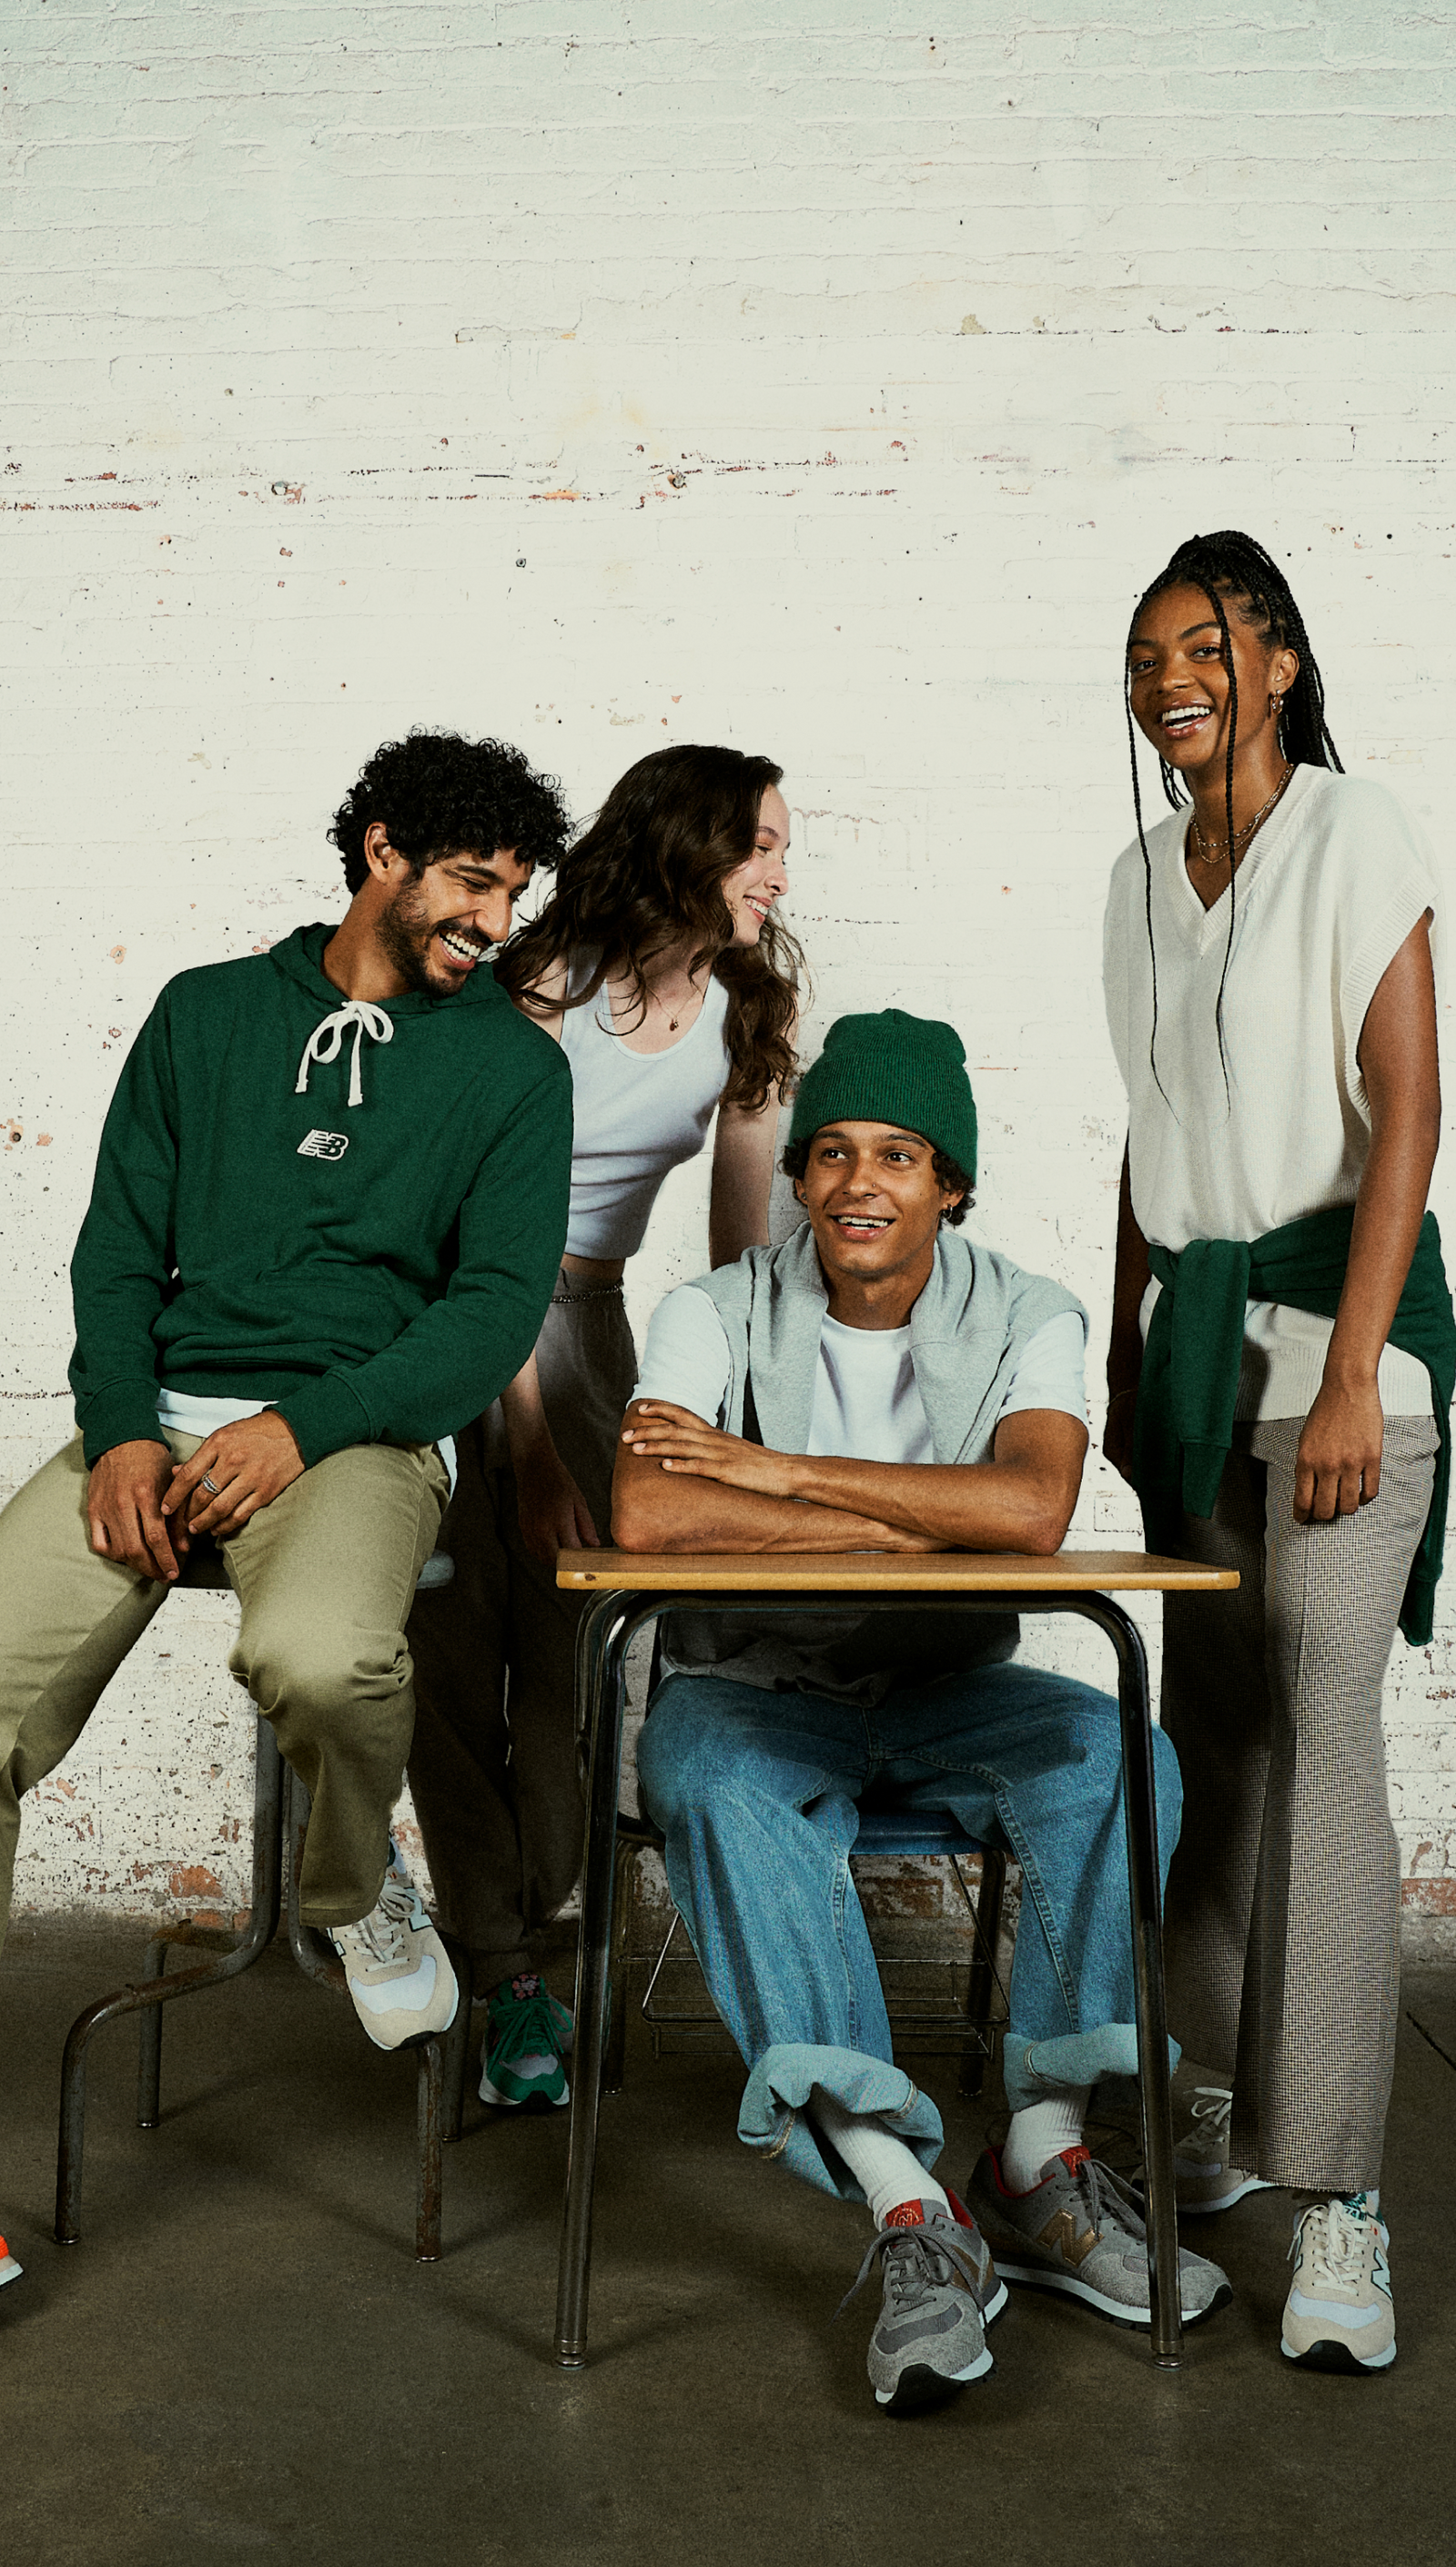 New Balance 574 Back To School Campaign 